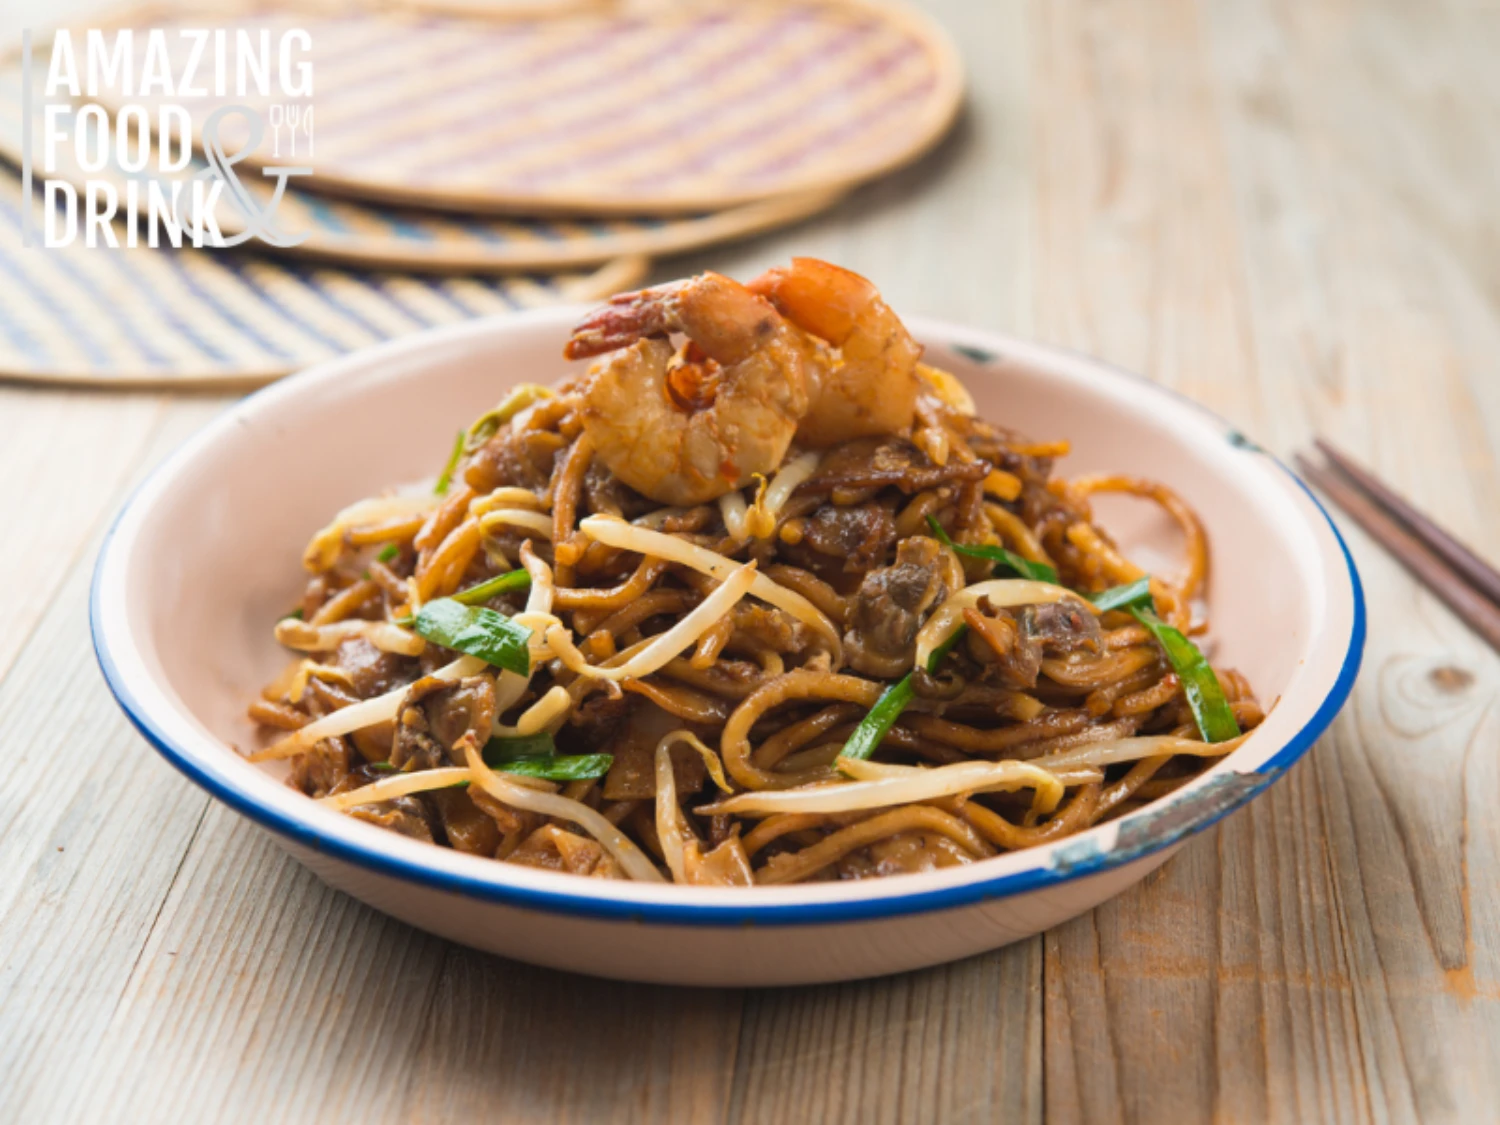 Fried Char Kuey Teow, popular noodle dish in Malaysia and Singapore